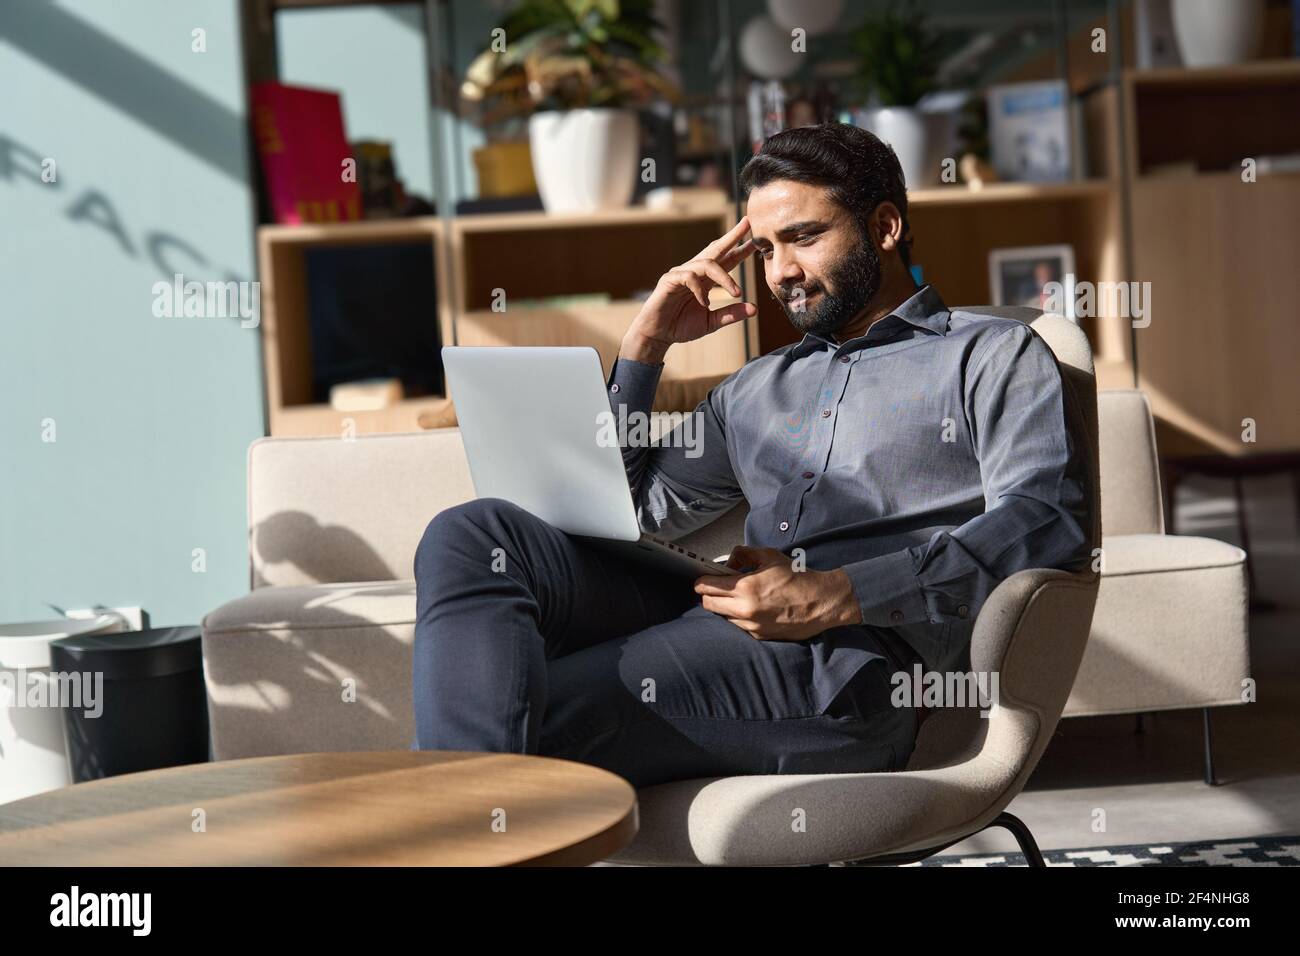 Indian business man executive working on laptop sitting on chair in office. Stock Photo